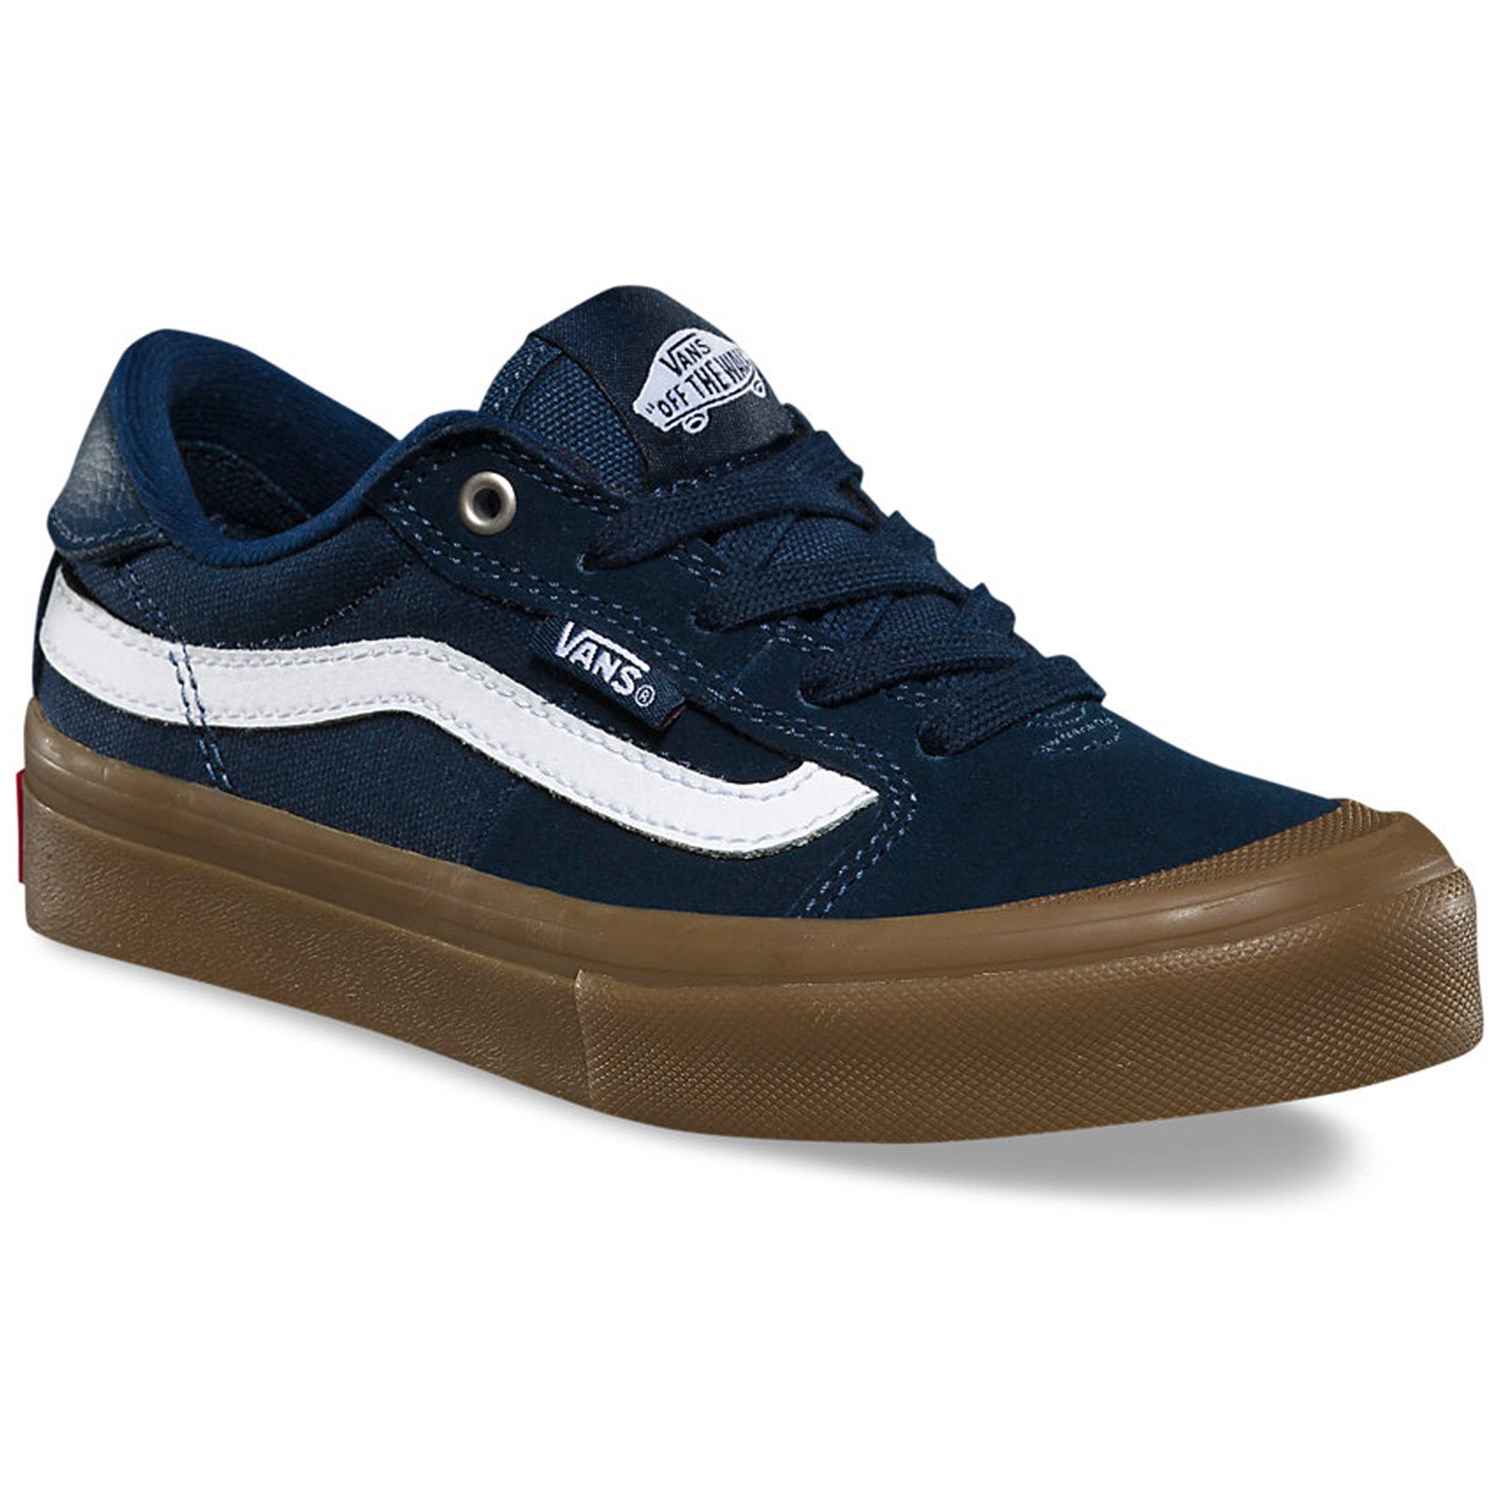 Vans Style 112 Pro Youth Shoes - Boys 